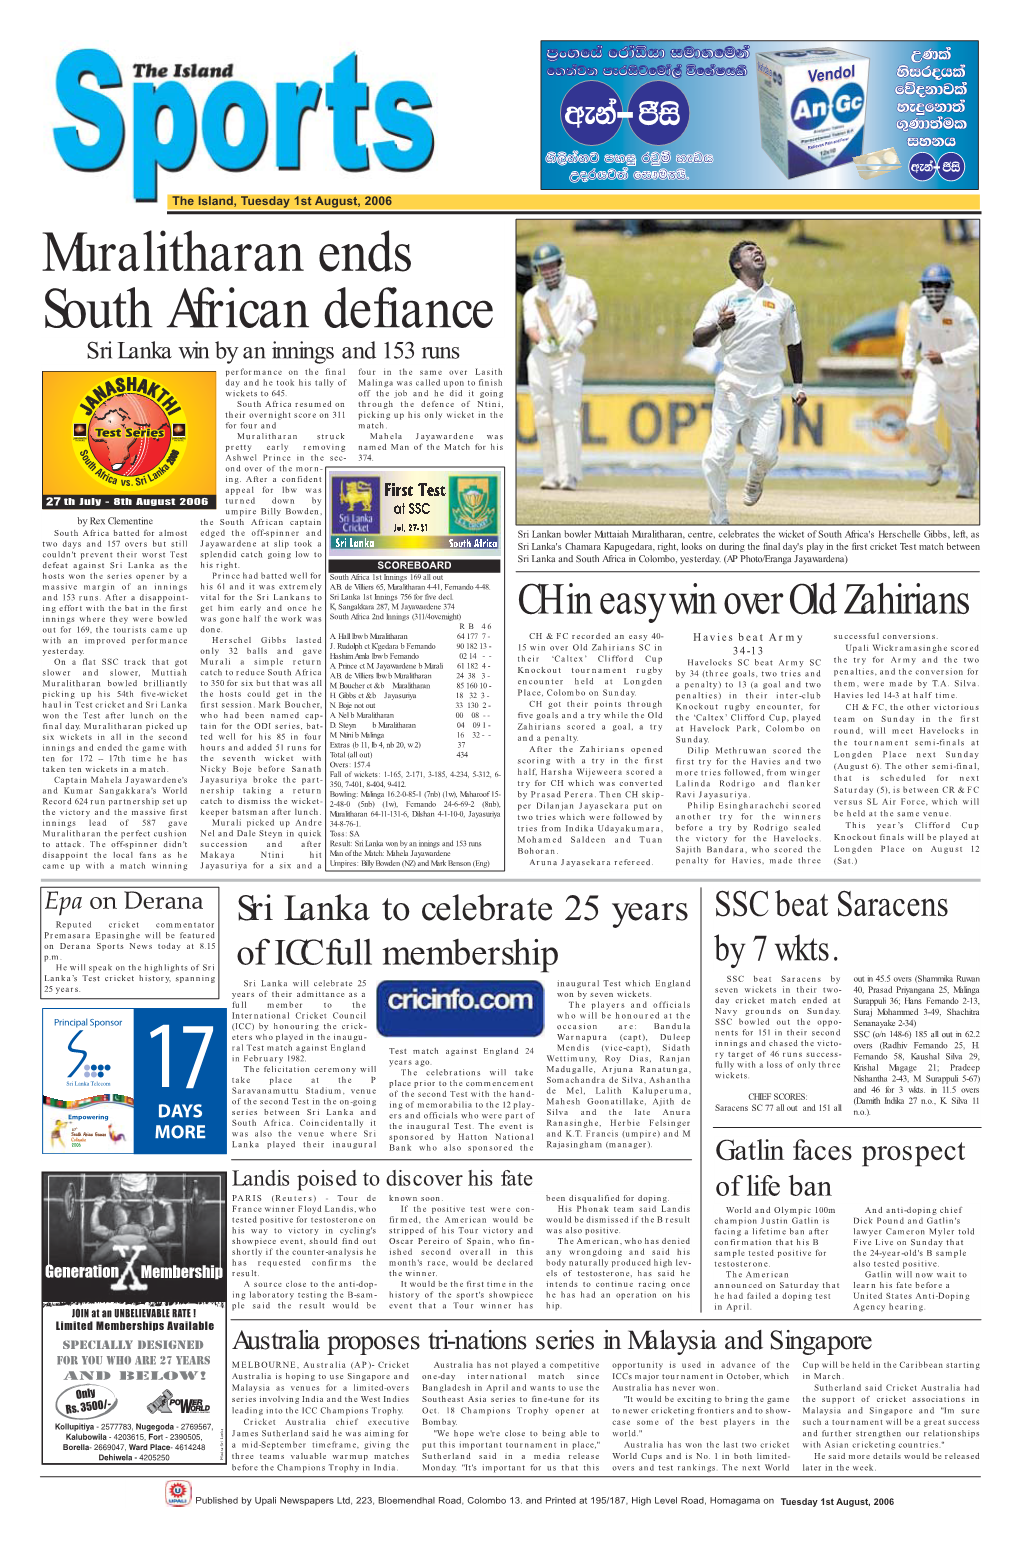 Muralitharan Ends South African Defiance